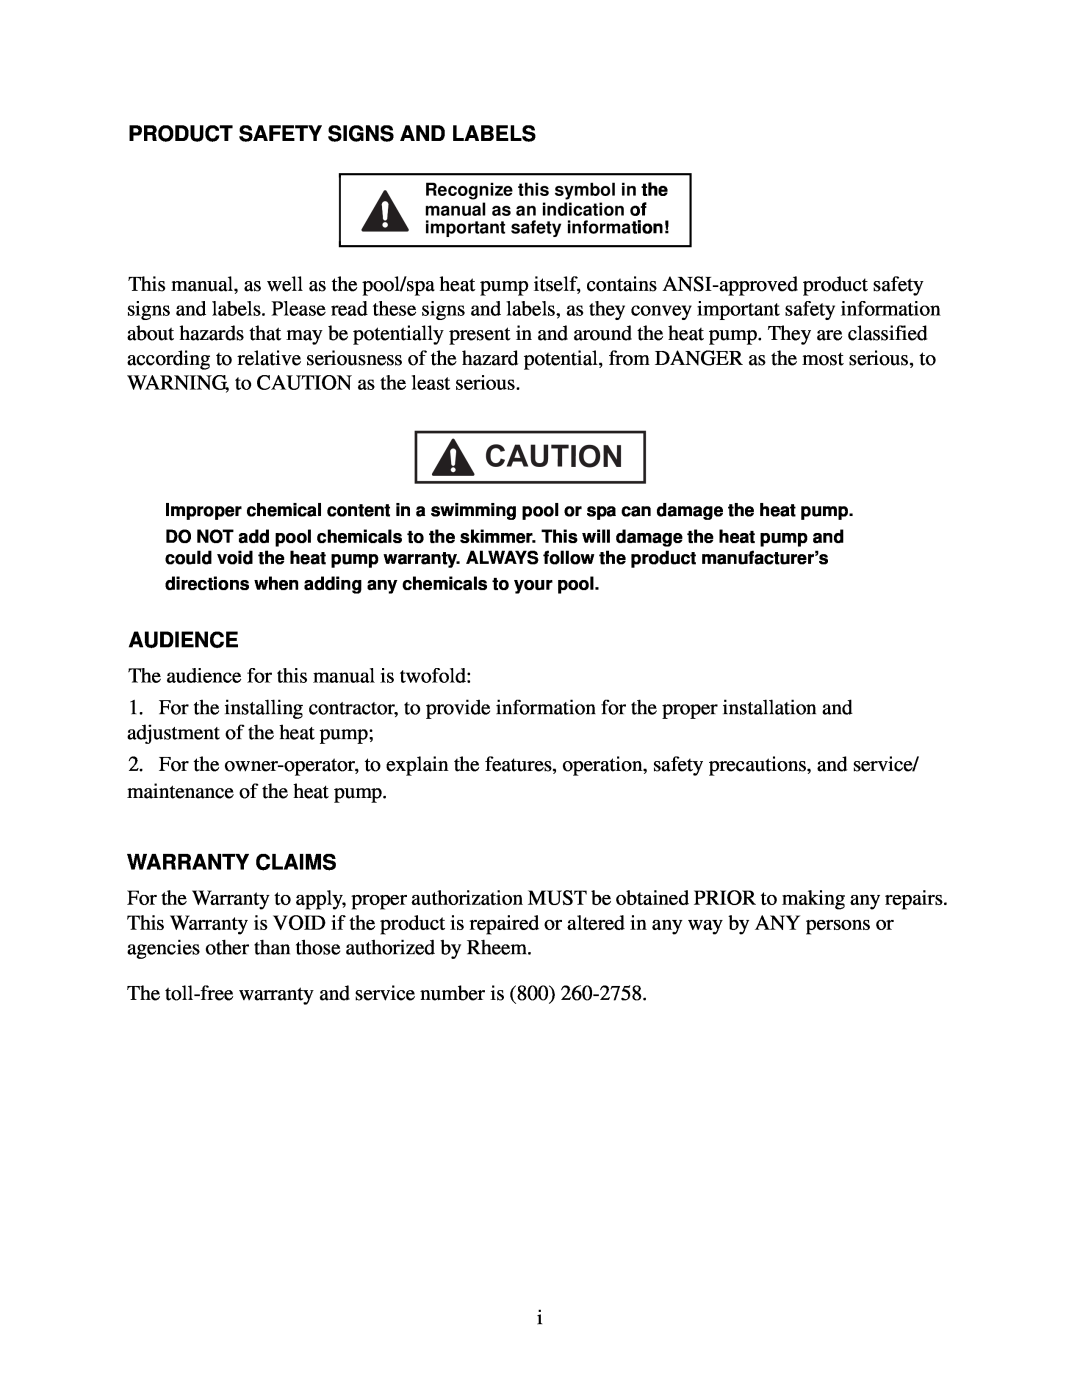 Raypak 5300, 6300, 8300 owner manual Product Safety Signs And Labels, Audience, Warranty Claims 